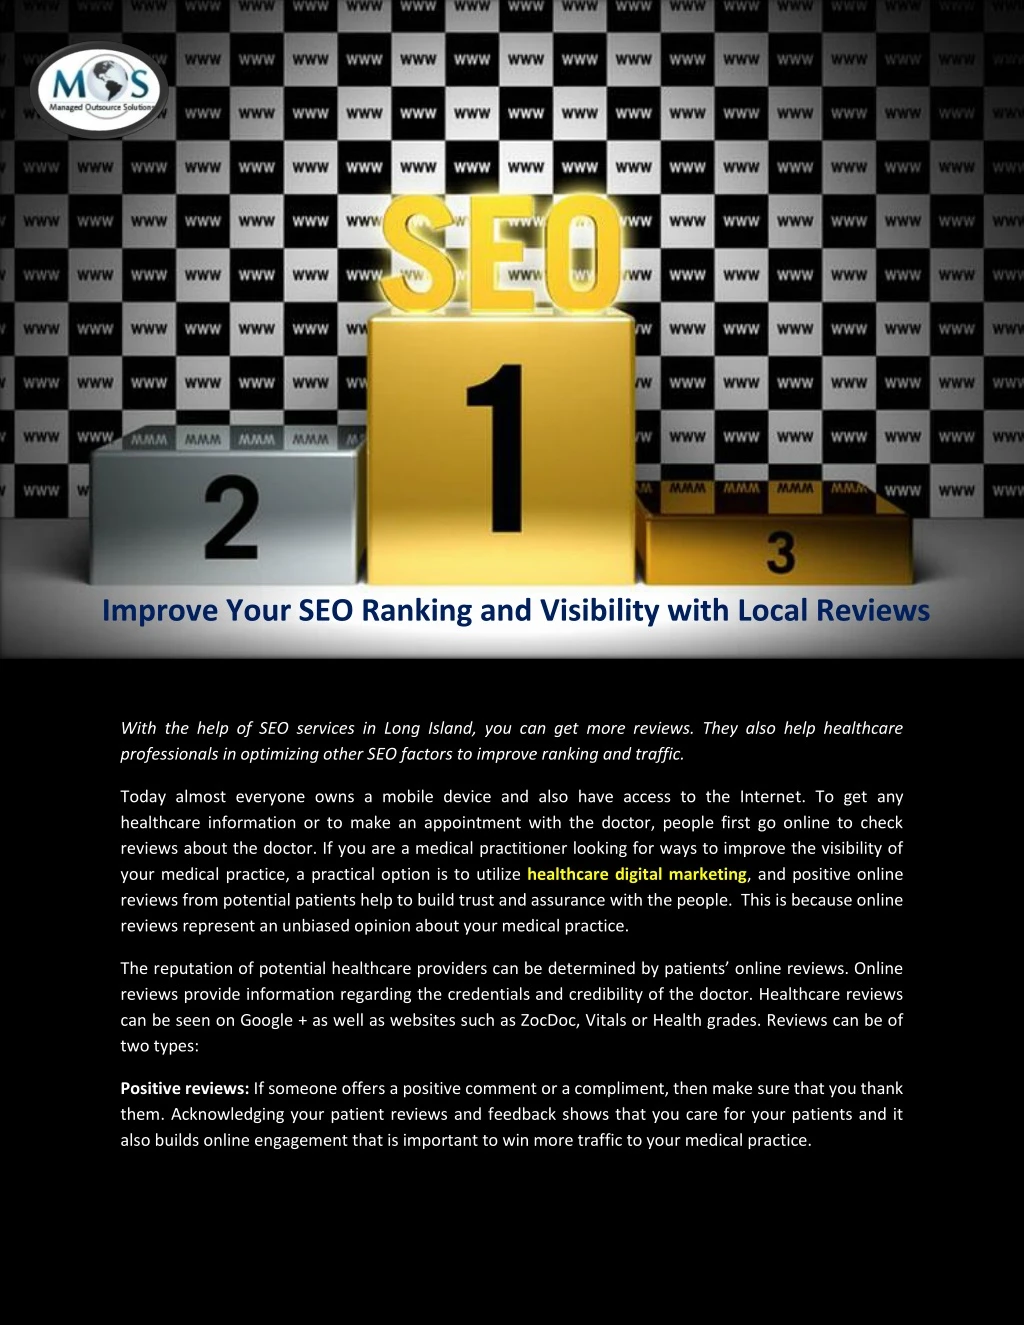 improve your seo ranking and visibility with